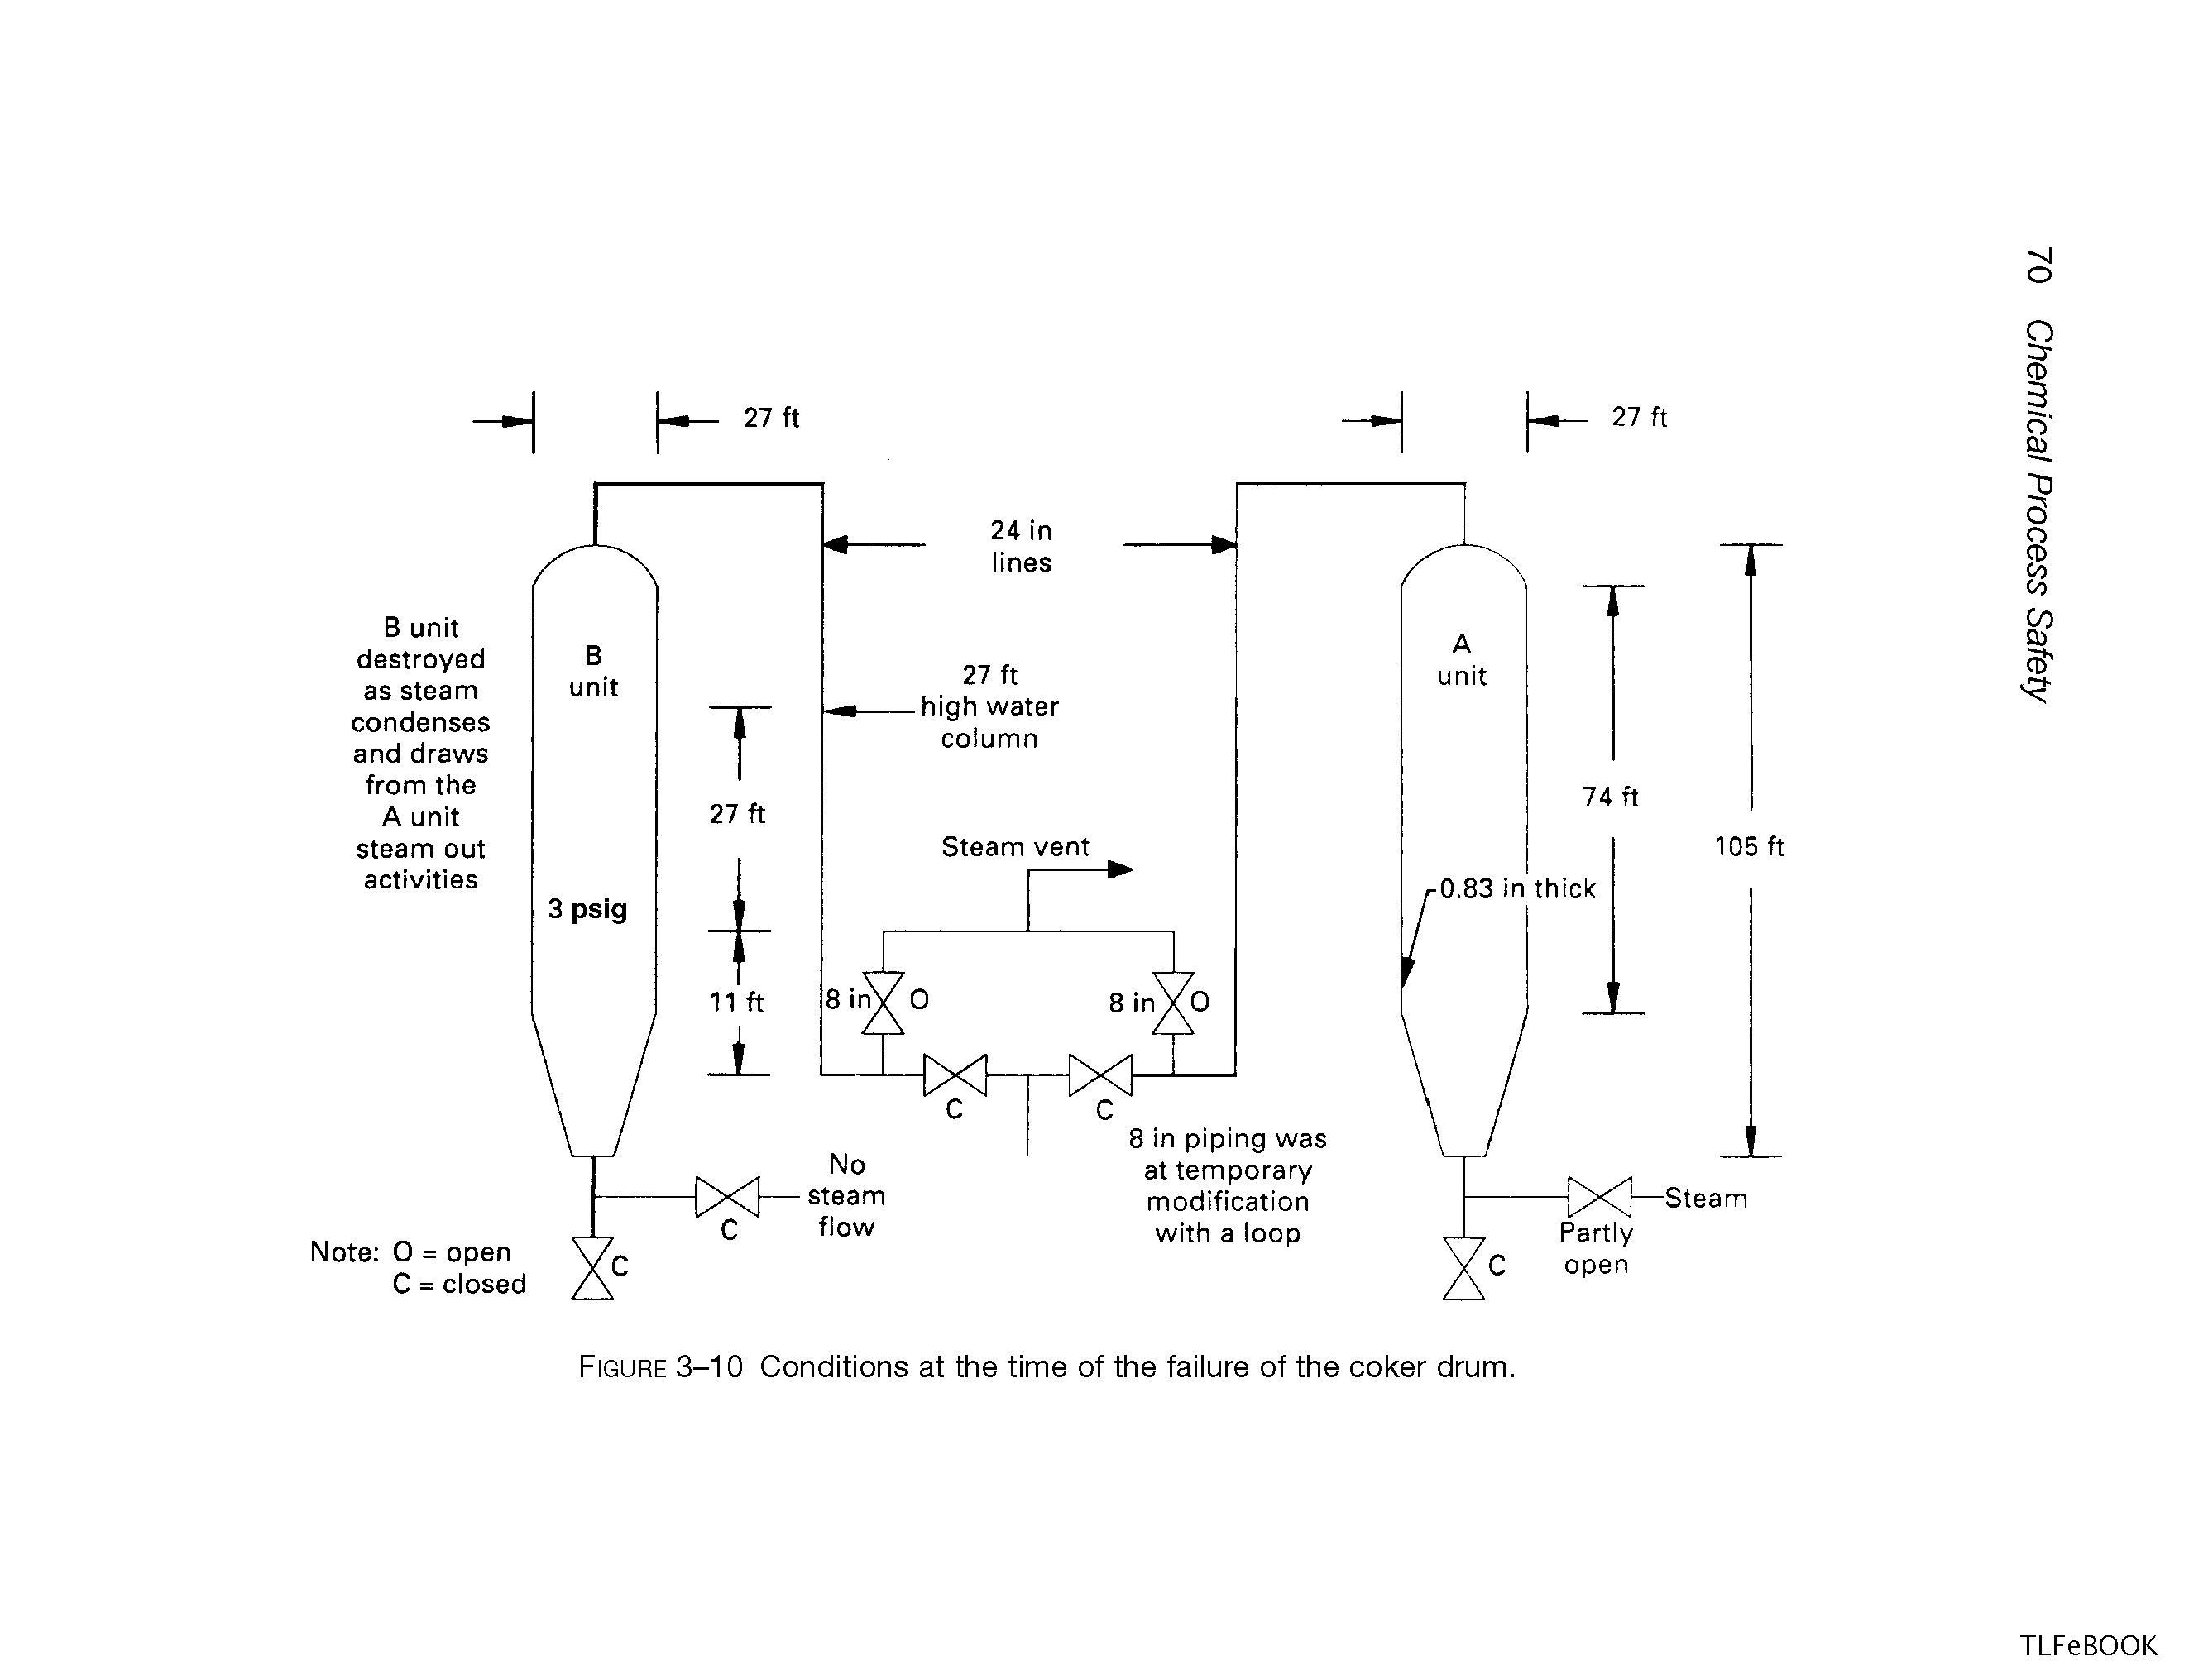 Figure 3-10 Conditions at the time of the failure of the coker drum.